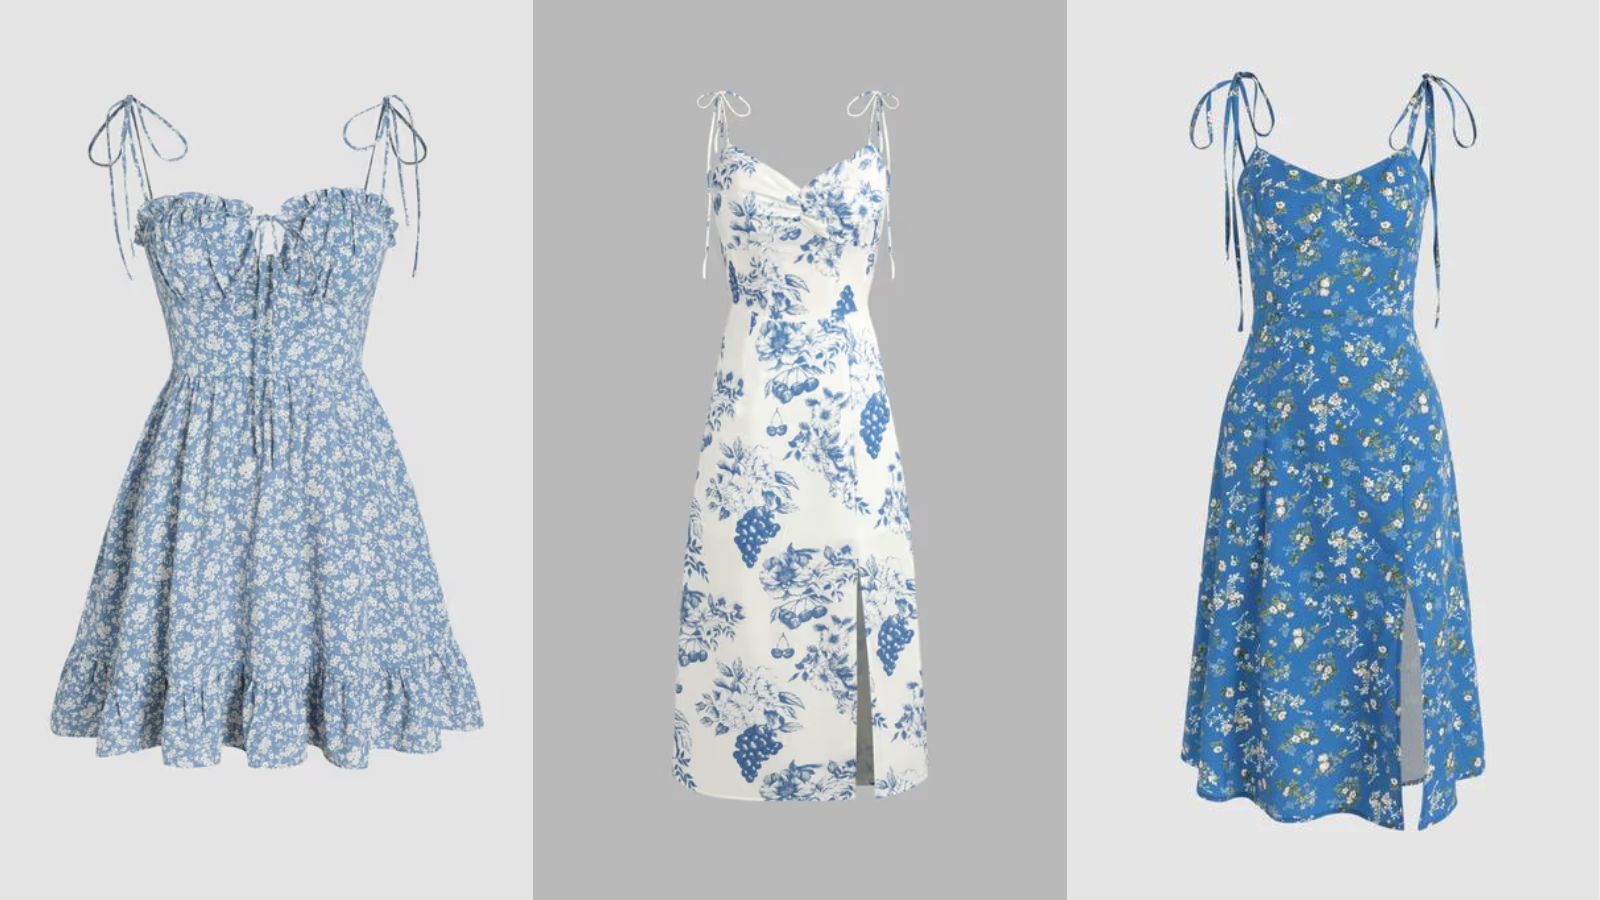 FLORAL PRINT DRESSES FOR A PERFECT SUMMER START